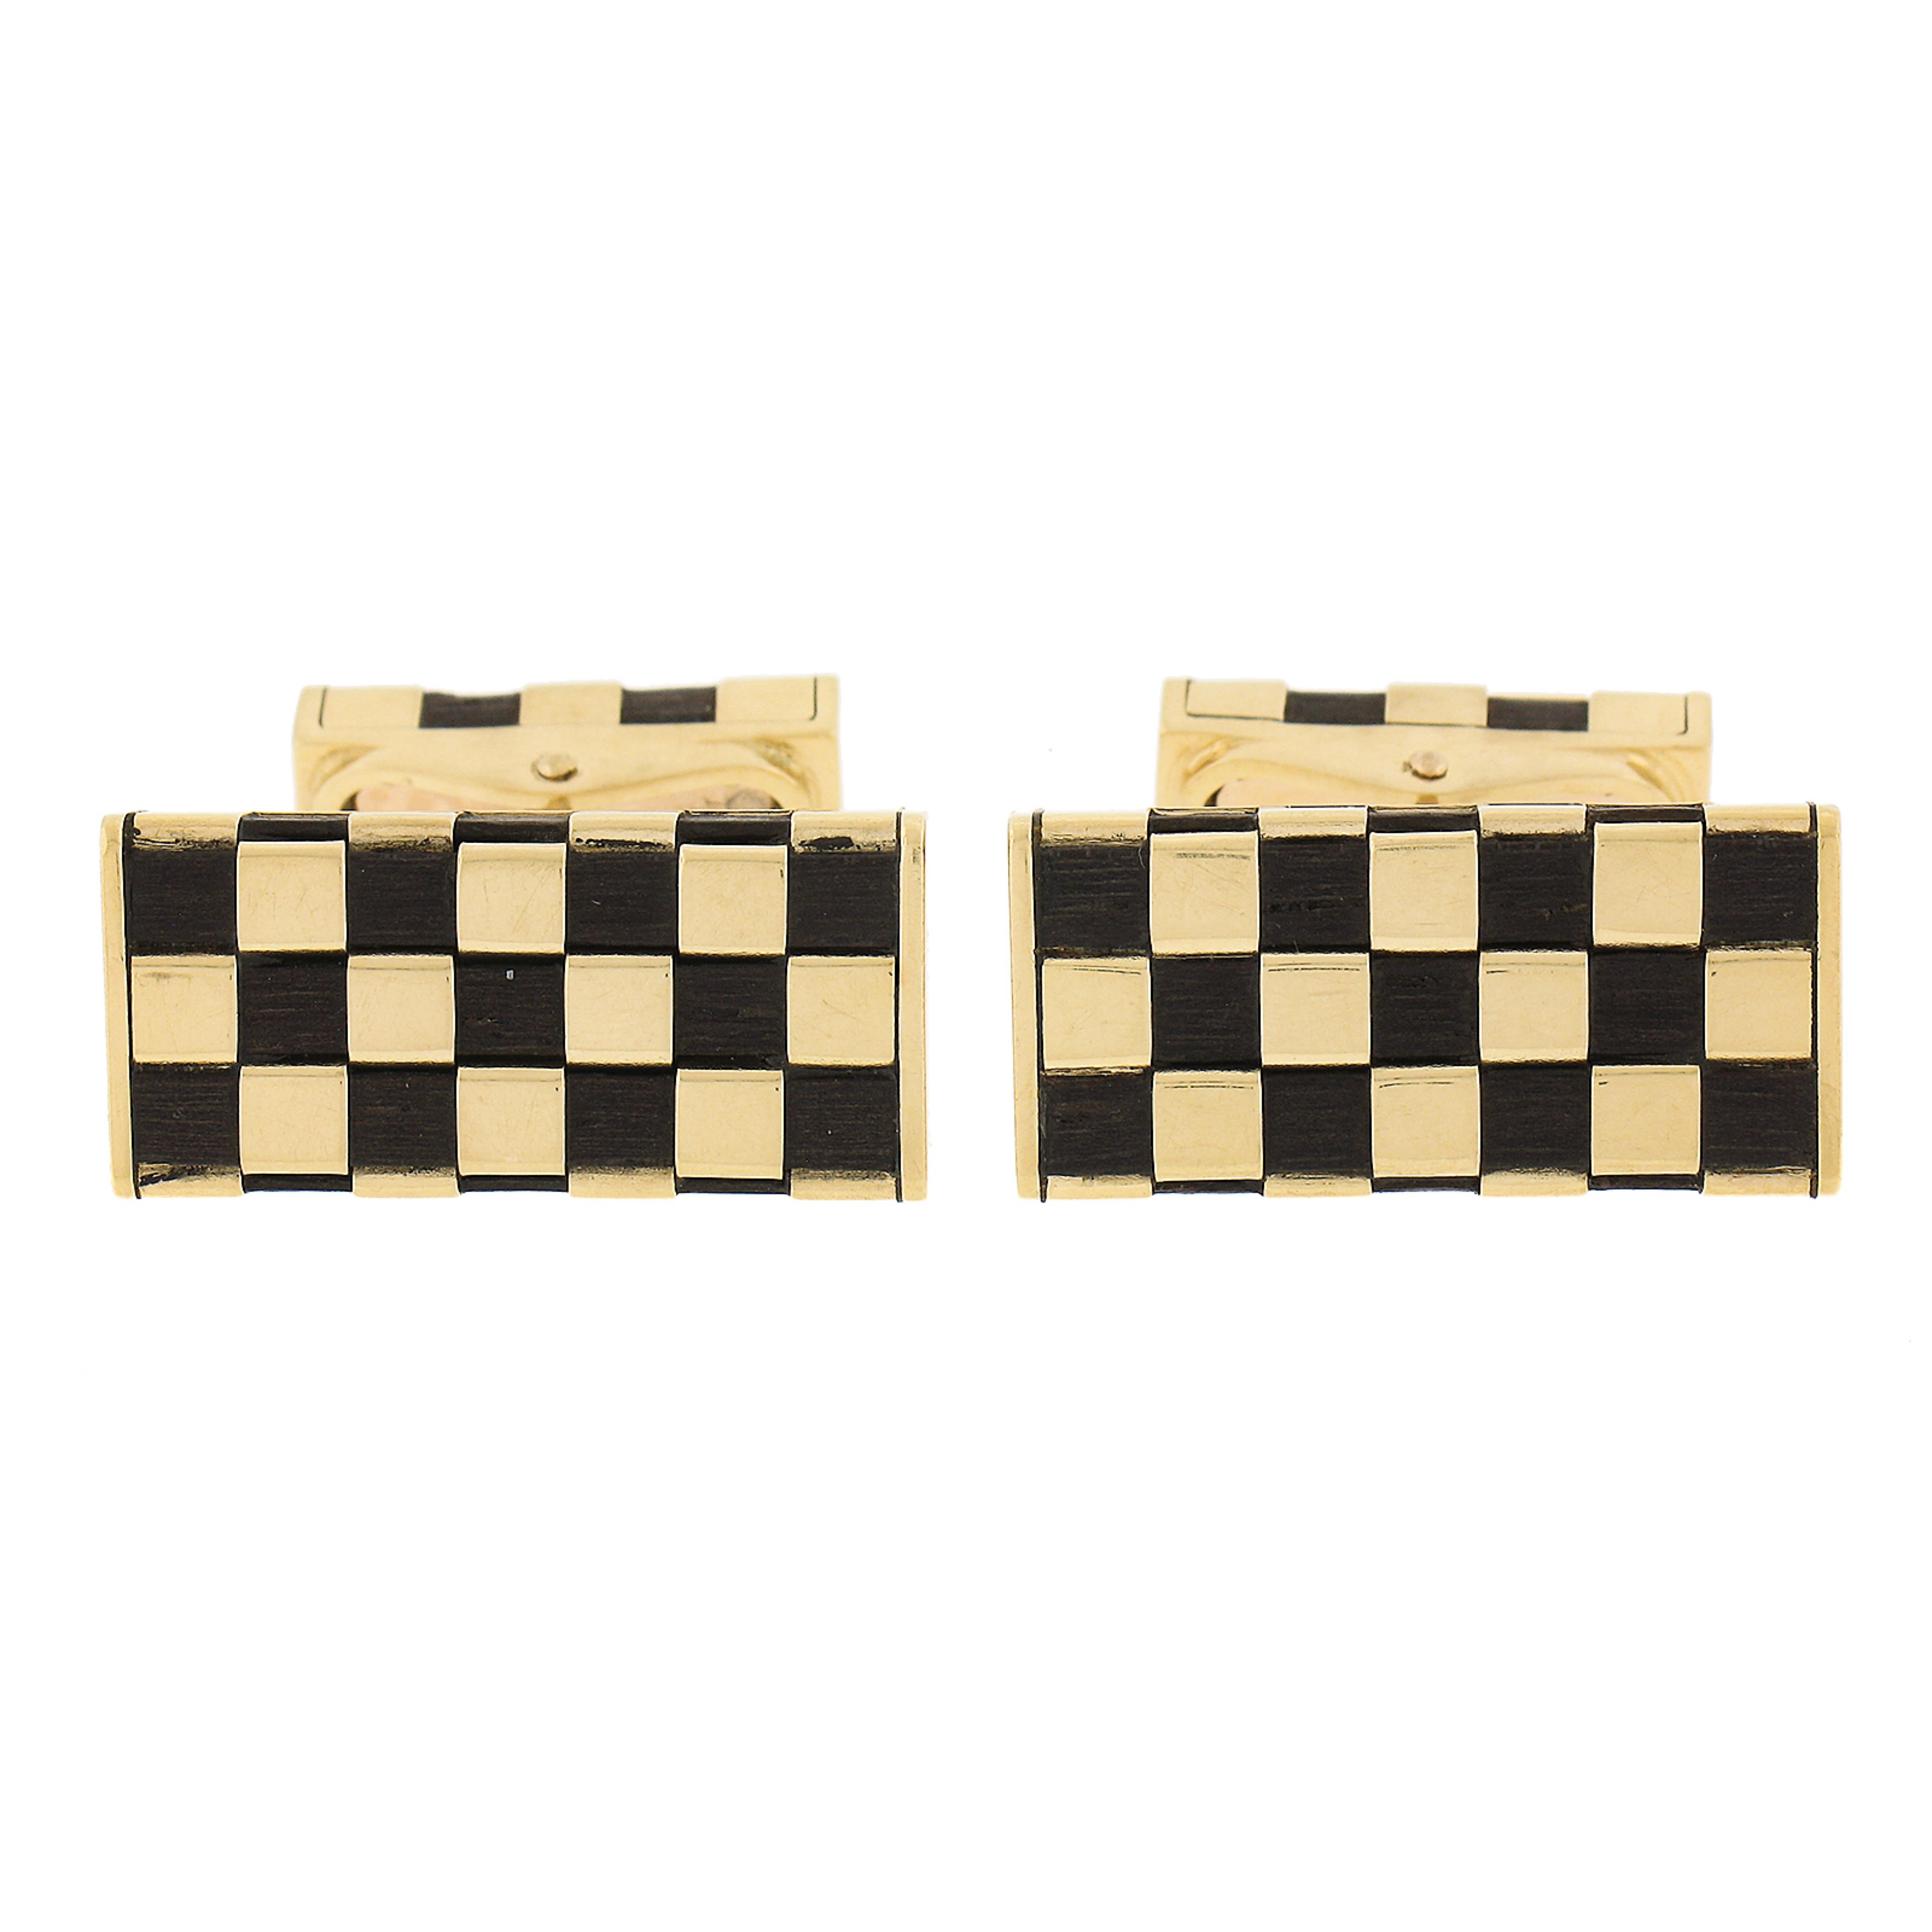 Authentic Designer Van Cleef & Arpels Vca French 18k Gold Wood Checkerboard Rectangular Cufflinks

Stones:
4 Wood - Rectangular Cut - Brown Color

Material: 18K Solid Yellow Gold
Weight: 16.92 Grams
Backing: Swivel Back
Panel Dimensions: